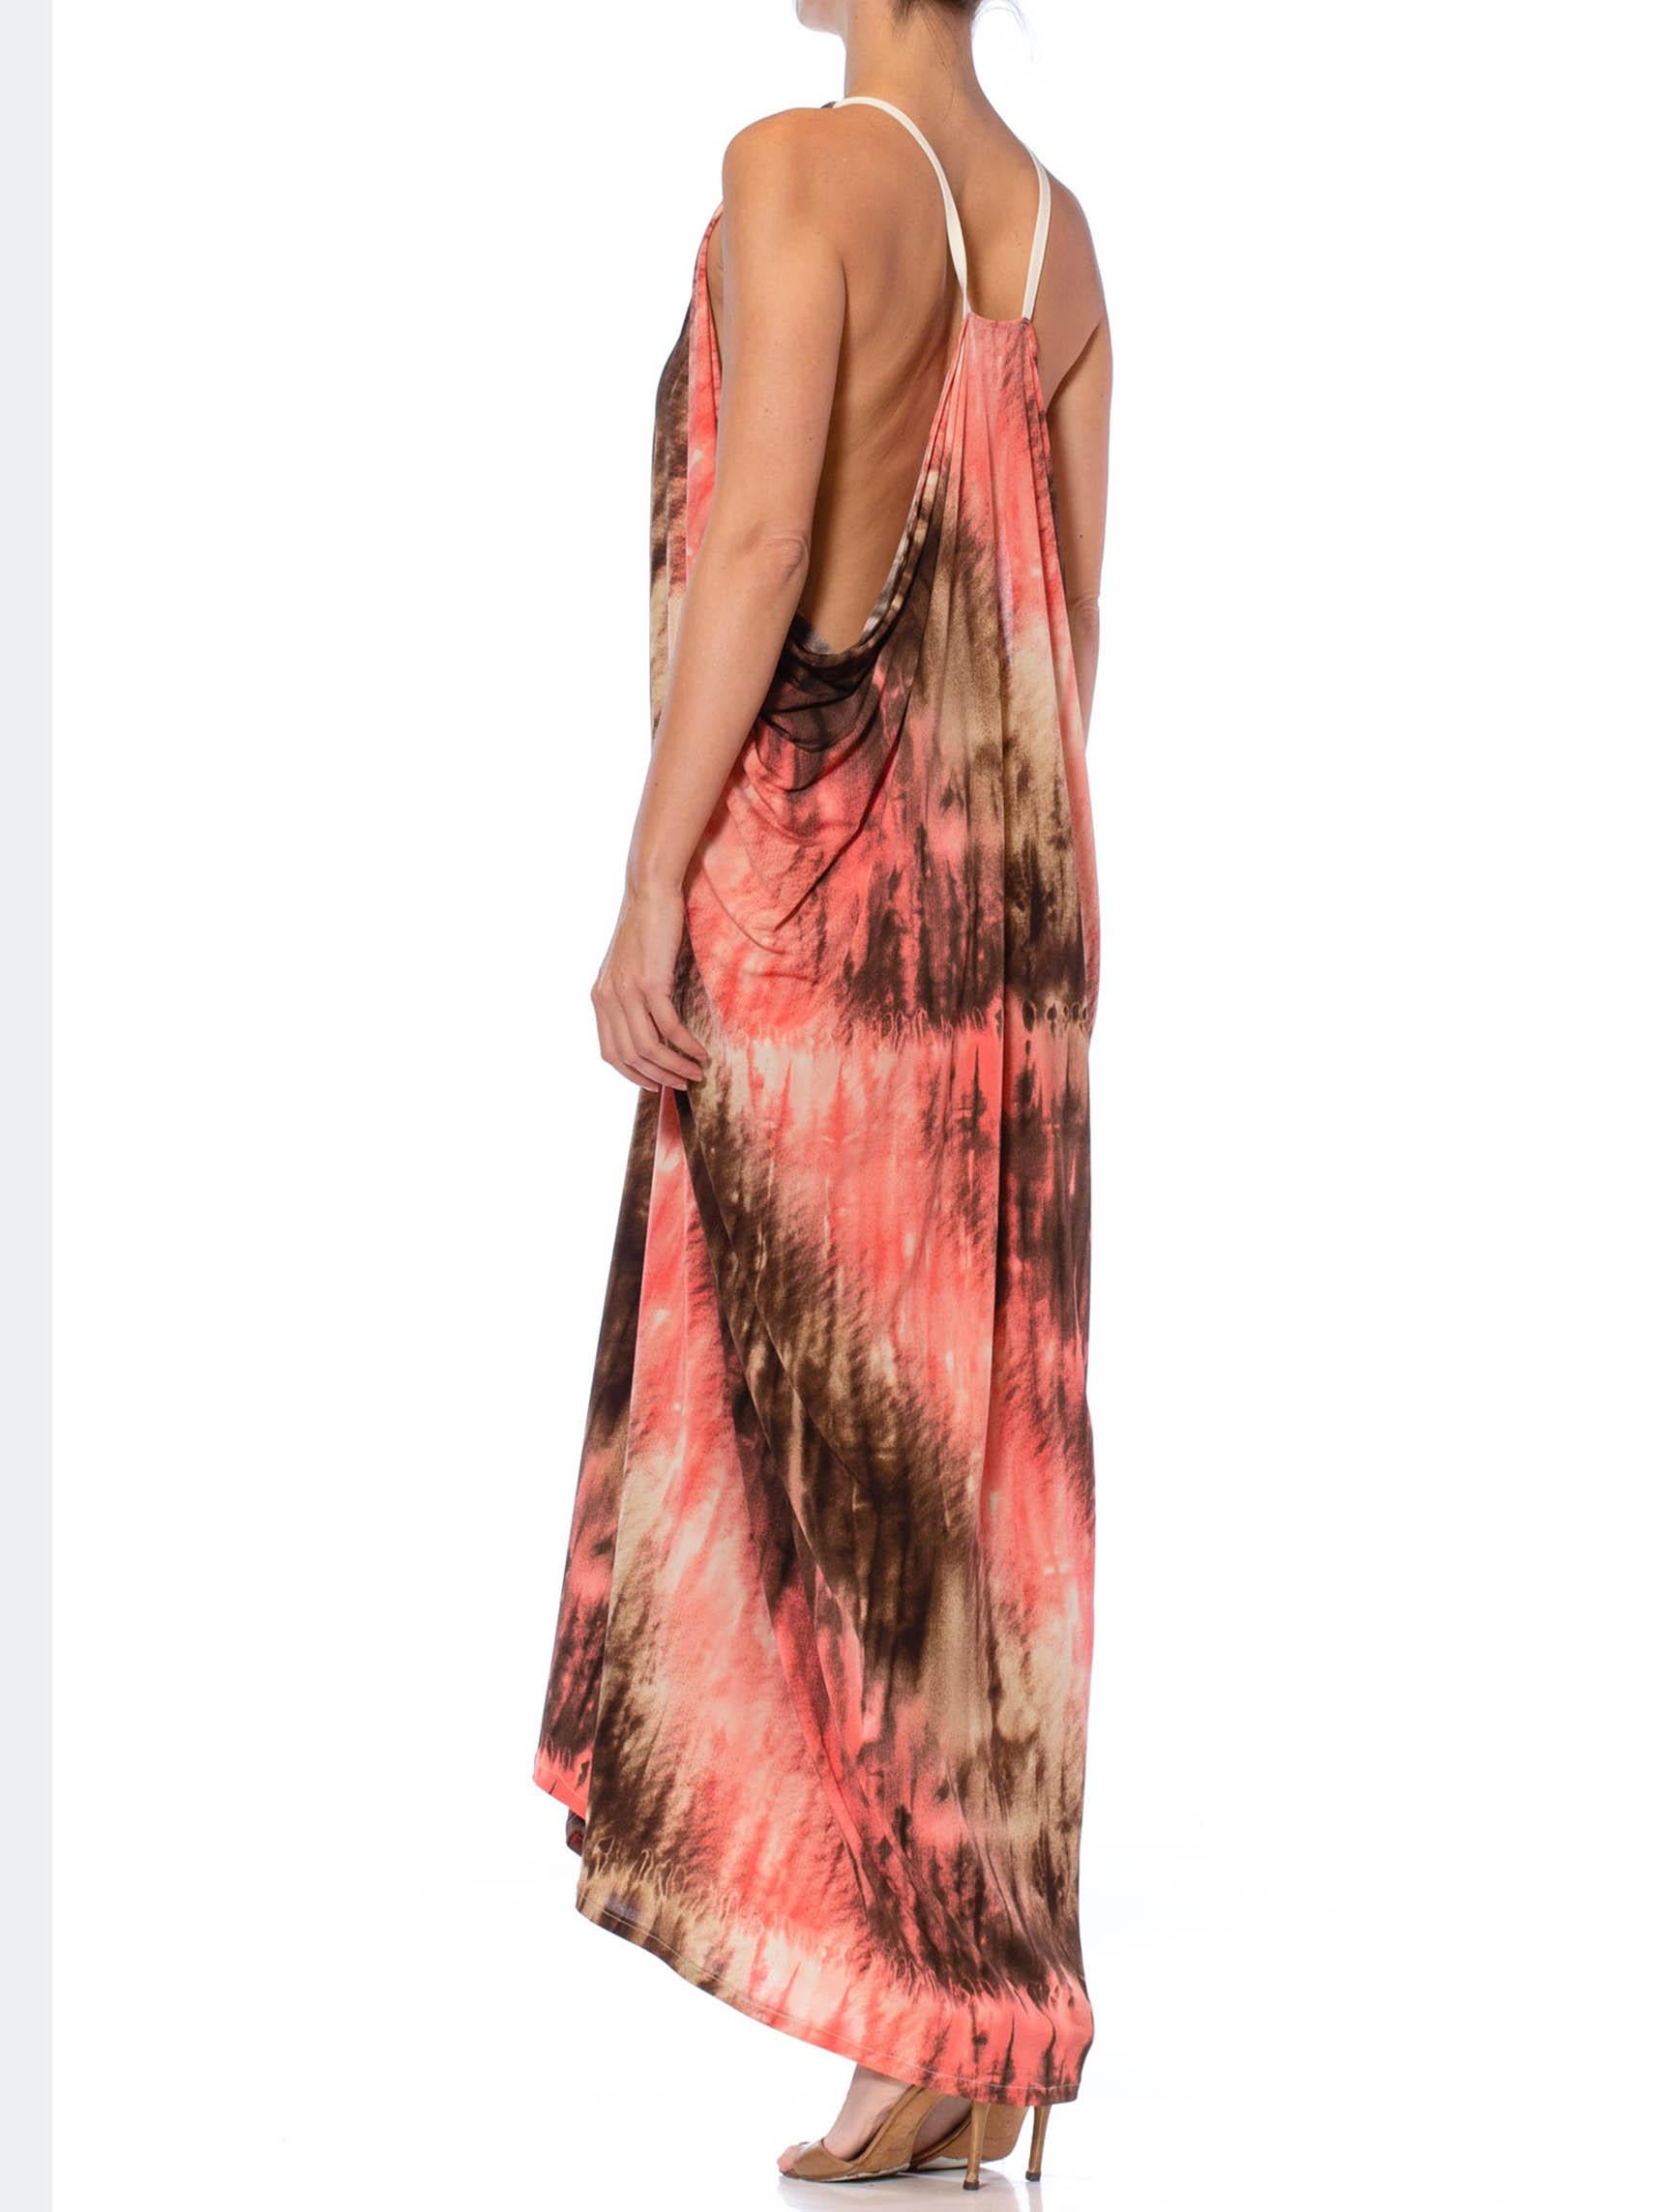 Women's MORPHEW COLLECTION Peach Tie Dyed Poly Blend Jersey Slinky Dye Print Beach Dress For Sale